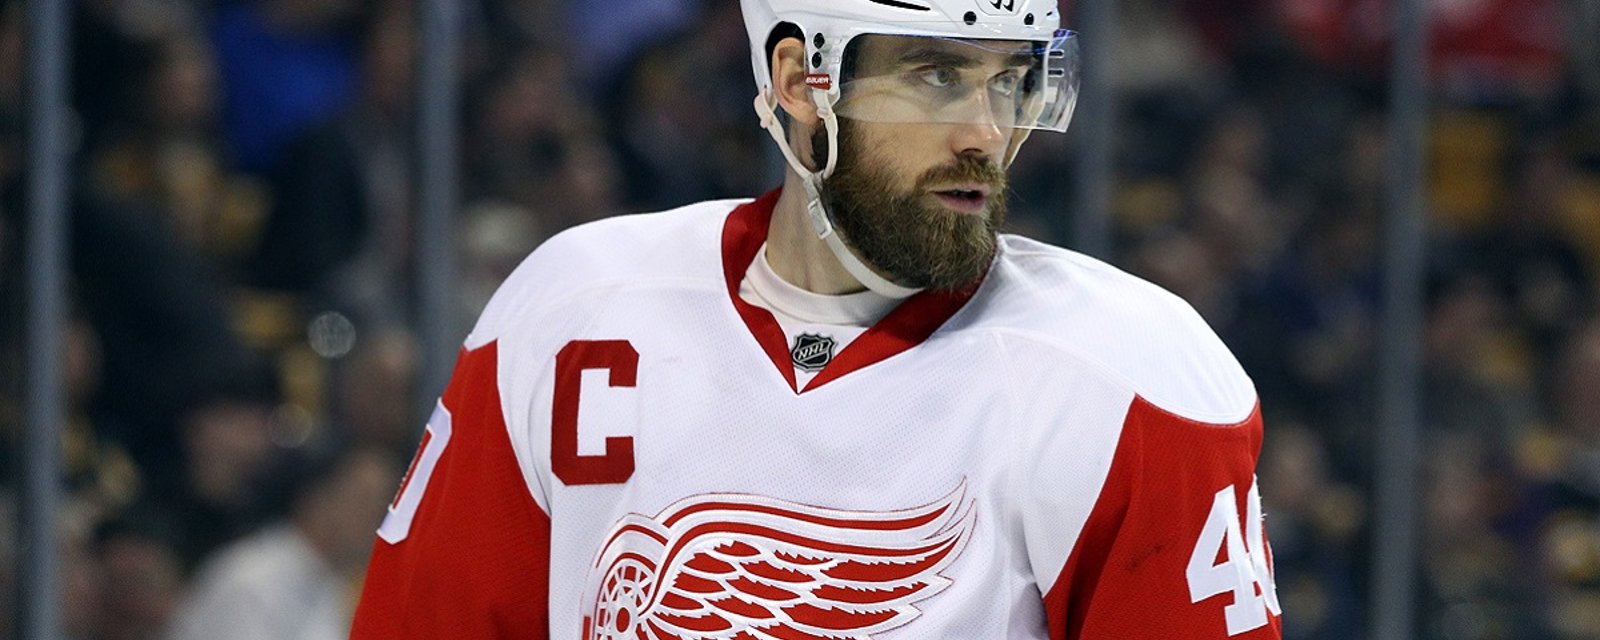 Report: Injury forces replacement of Zetterberg on World Cup roster.